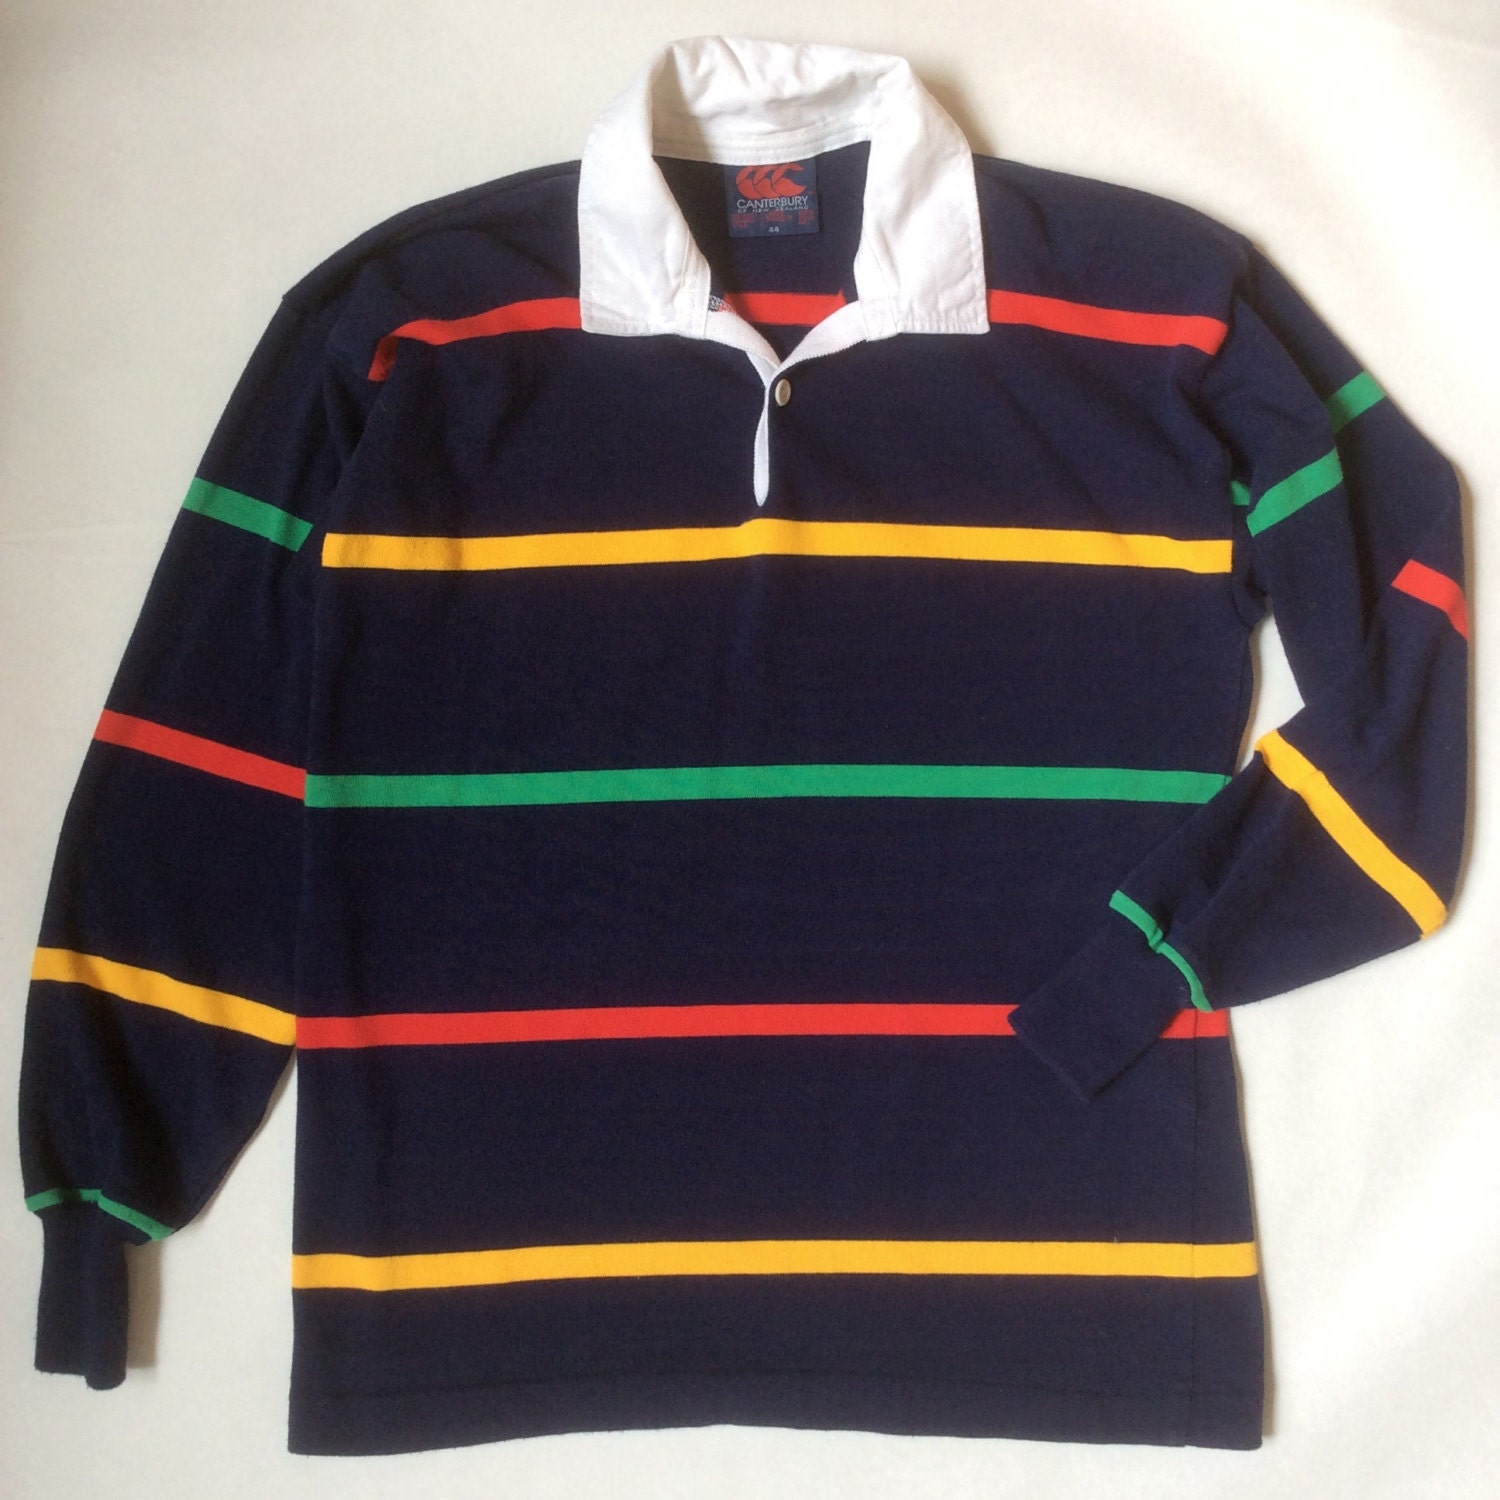 Men's rugby shirt navy blue striped in primary colors